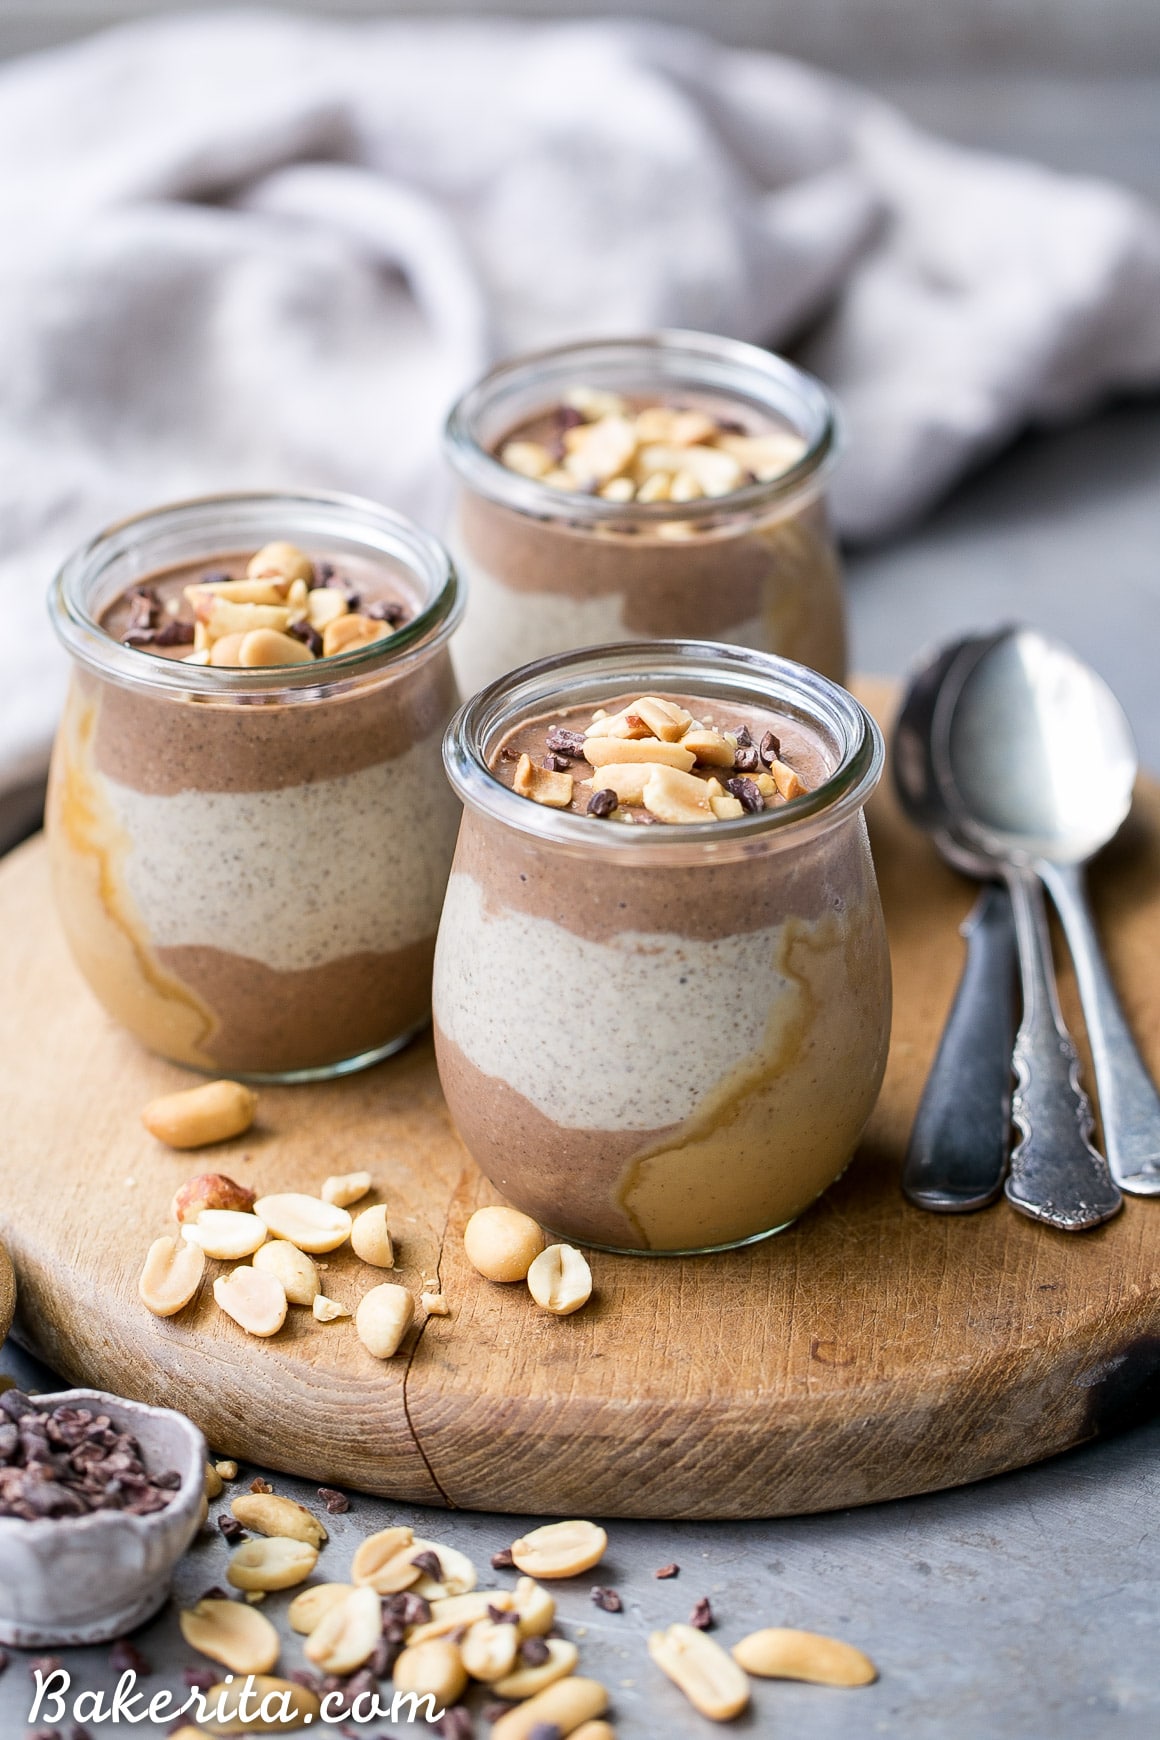 This Chocolate Peanut Butter Chia Pudding tastes like dessert, but it's made with wholesome ingredients that you can enjoy for breakfast! It's gluten-free, vegan, packed with protein, and it tastes like a peanut butter cup - what's not to love?